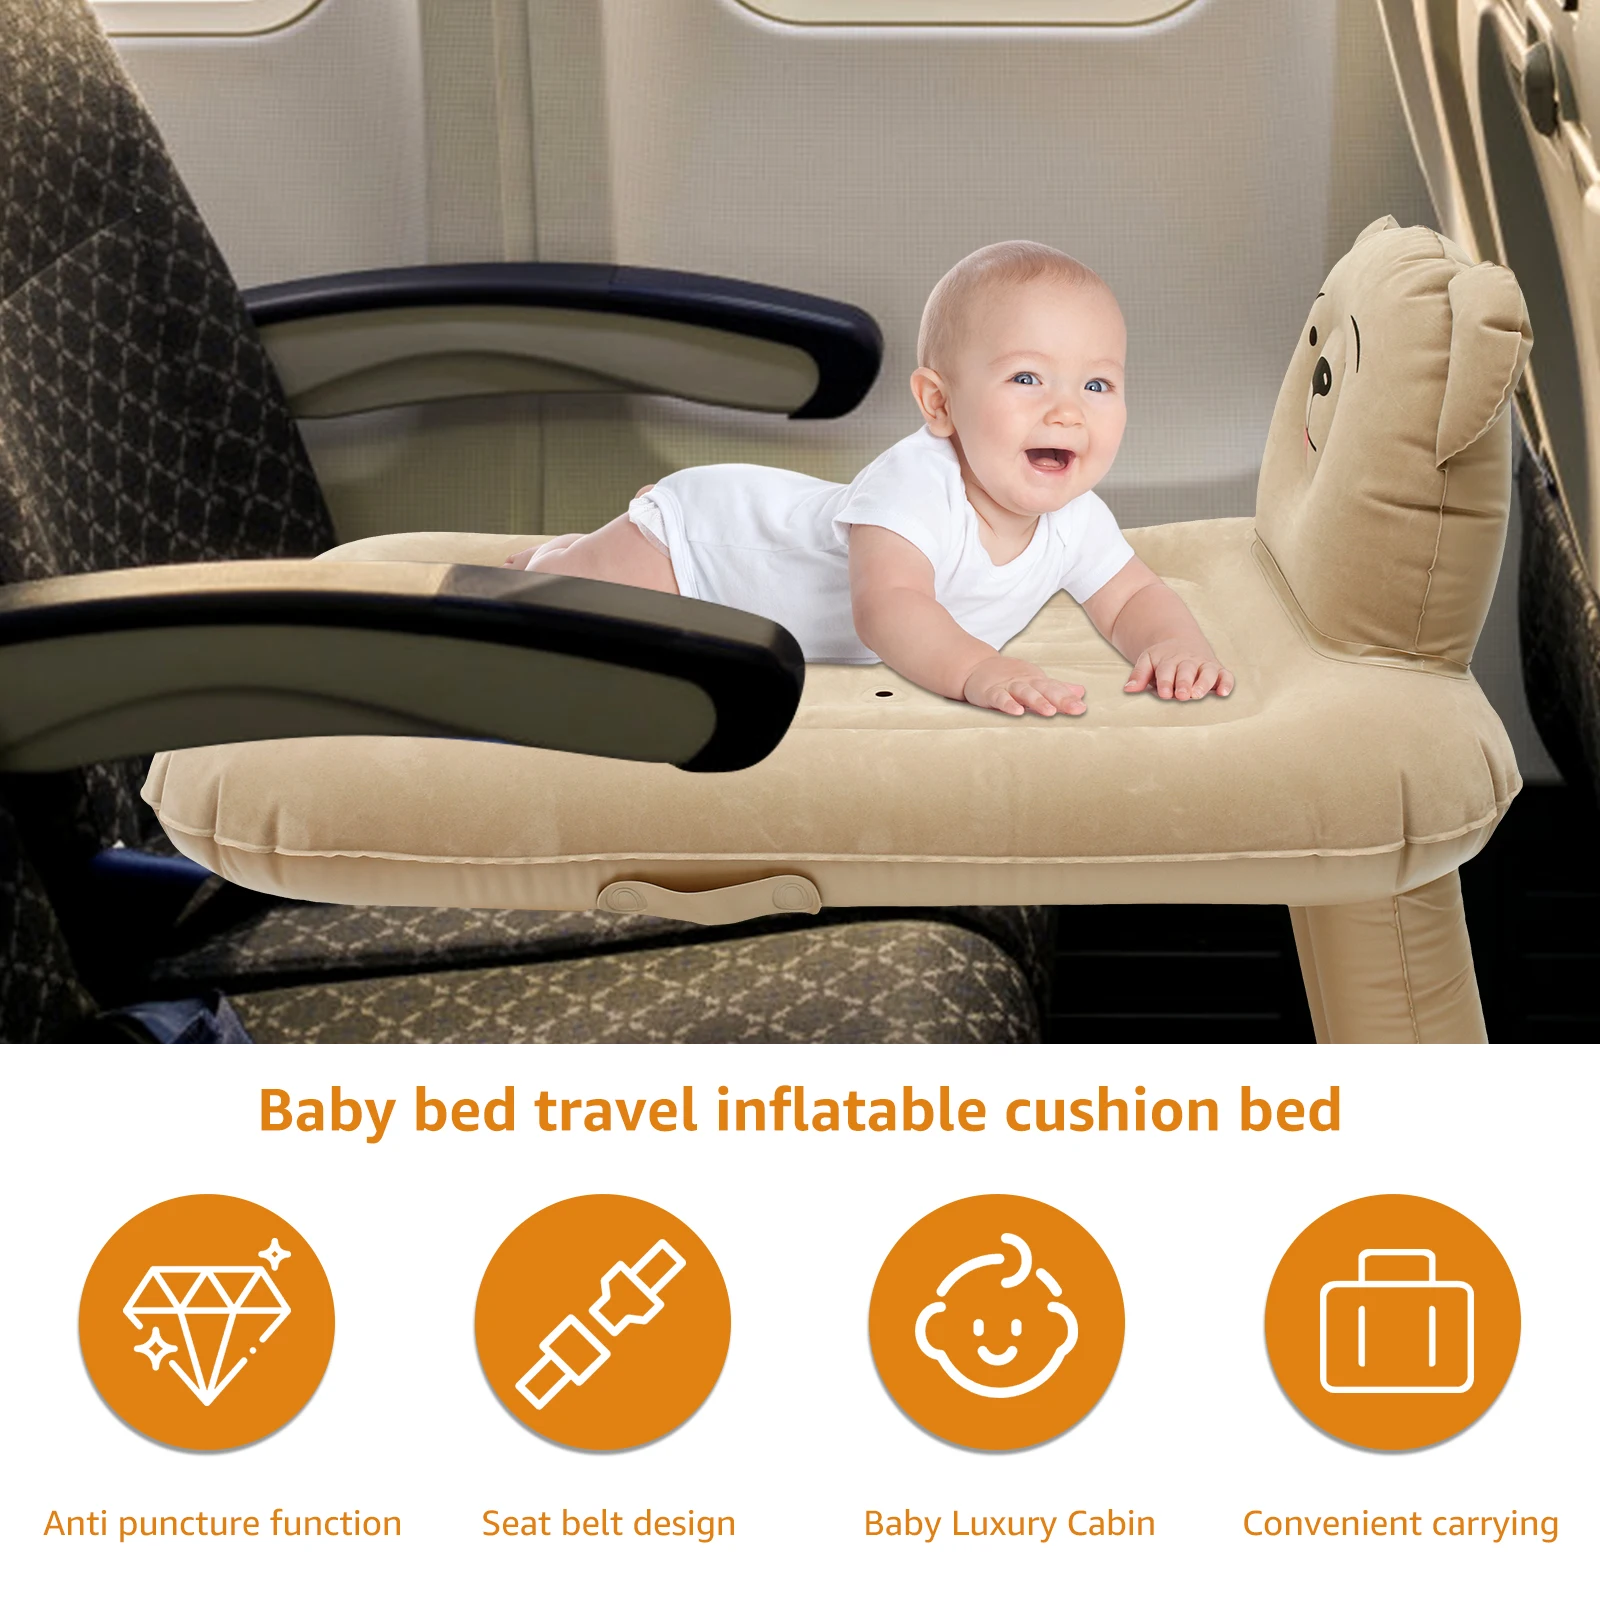 Portable Inflatable Airplane Bed Soft Toddler Plane Bed with Seat Belt Puncture Proof Flyaway Kids Bed Airplane for Baby Travel